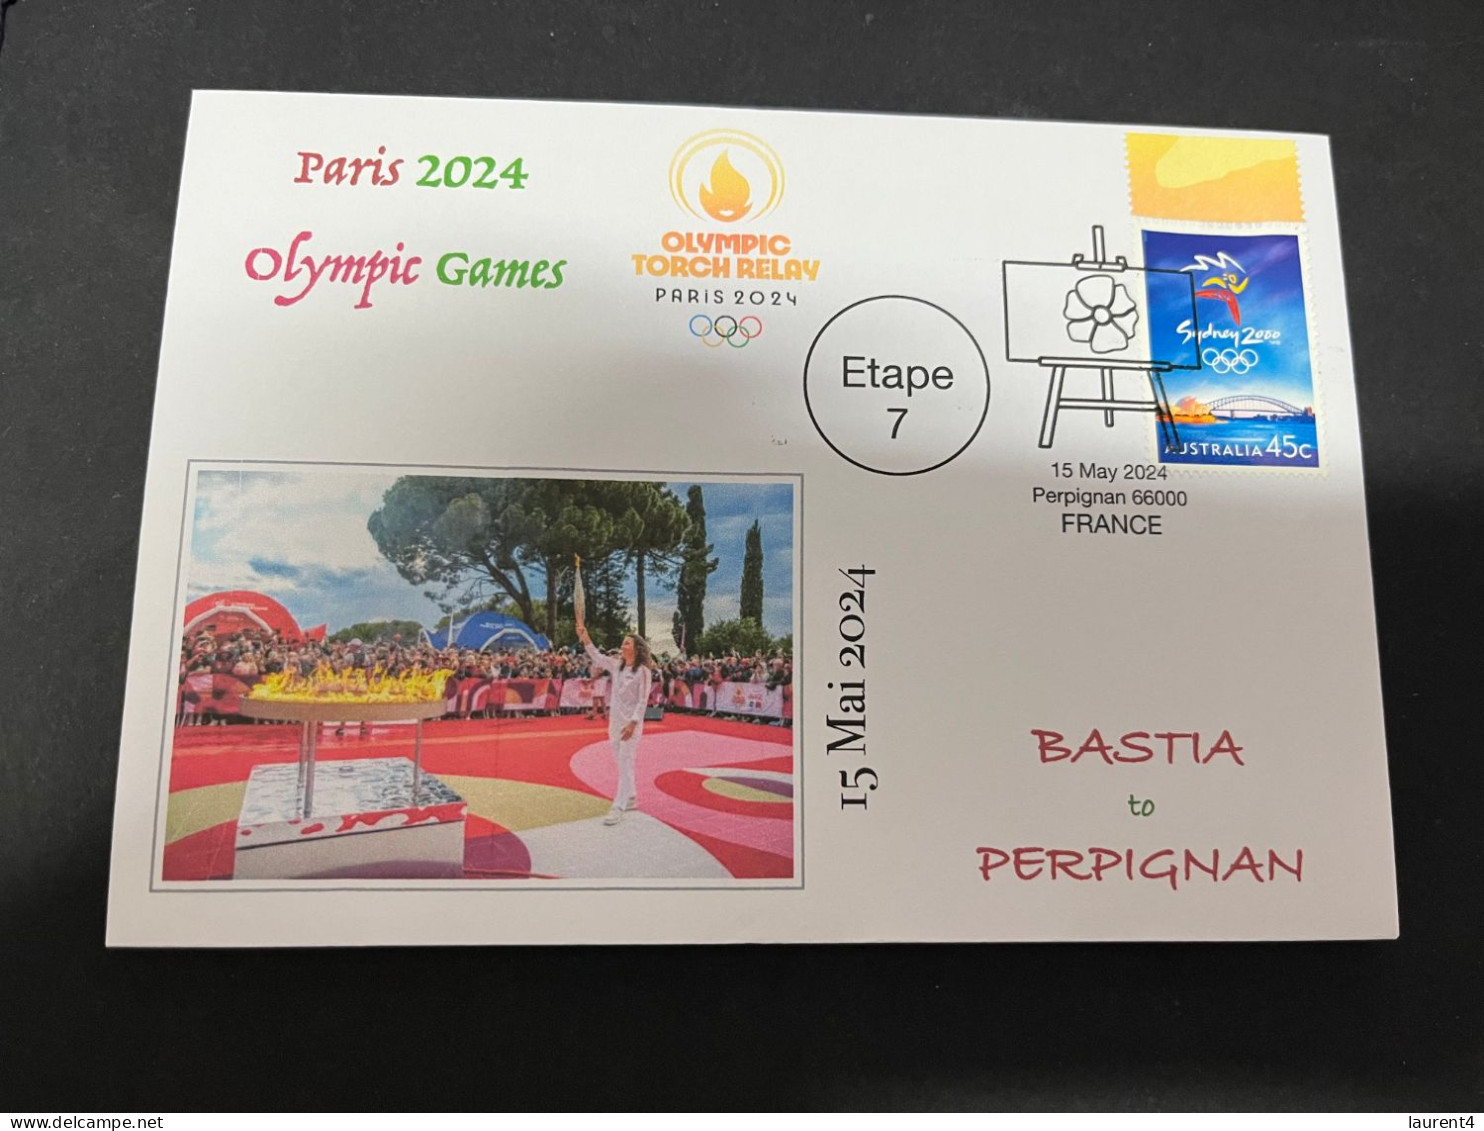 16-5-2024 (5 Z 17) Paris Olympic Games 2024 - Torch Relay (Etape 7) In Perpignan (15-5-2024) With OLYMPIC Stamp - Summer 2024: Paris